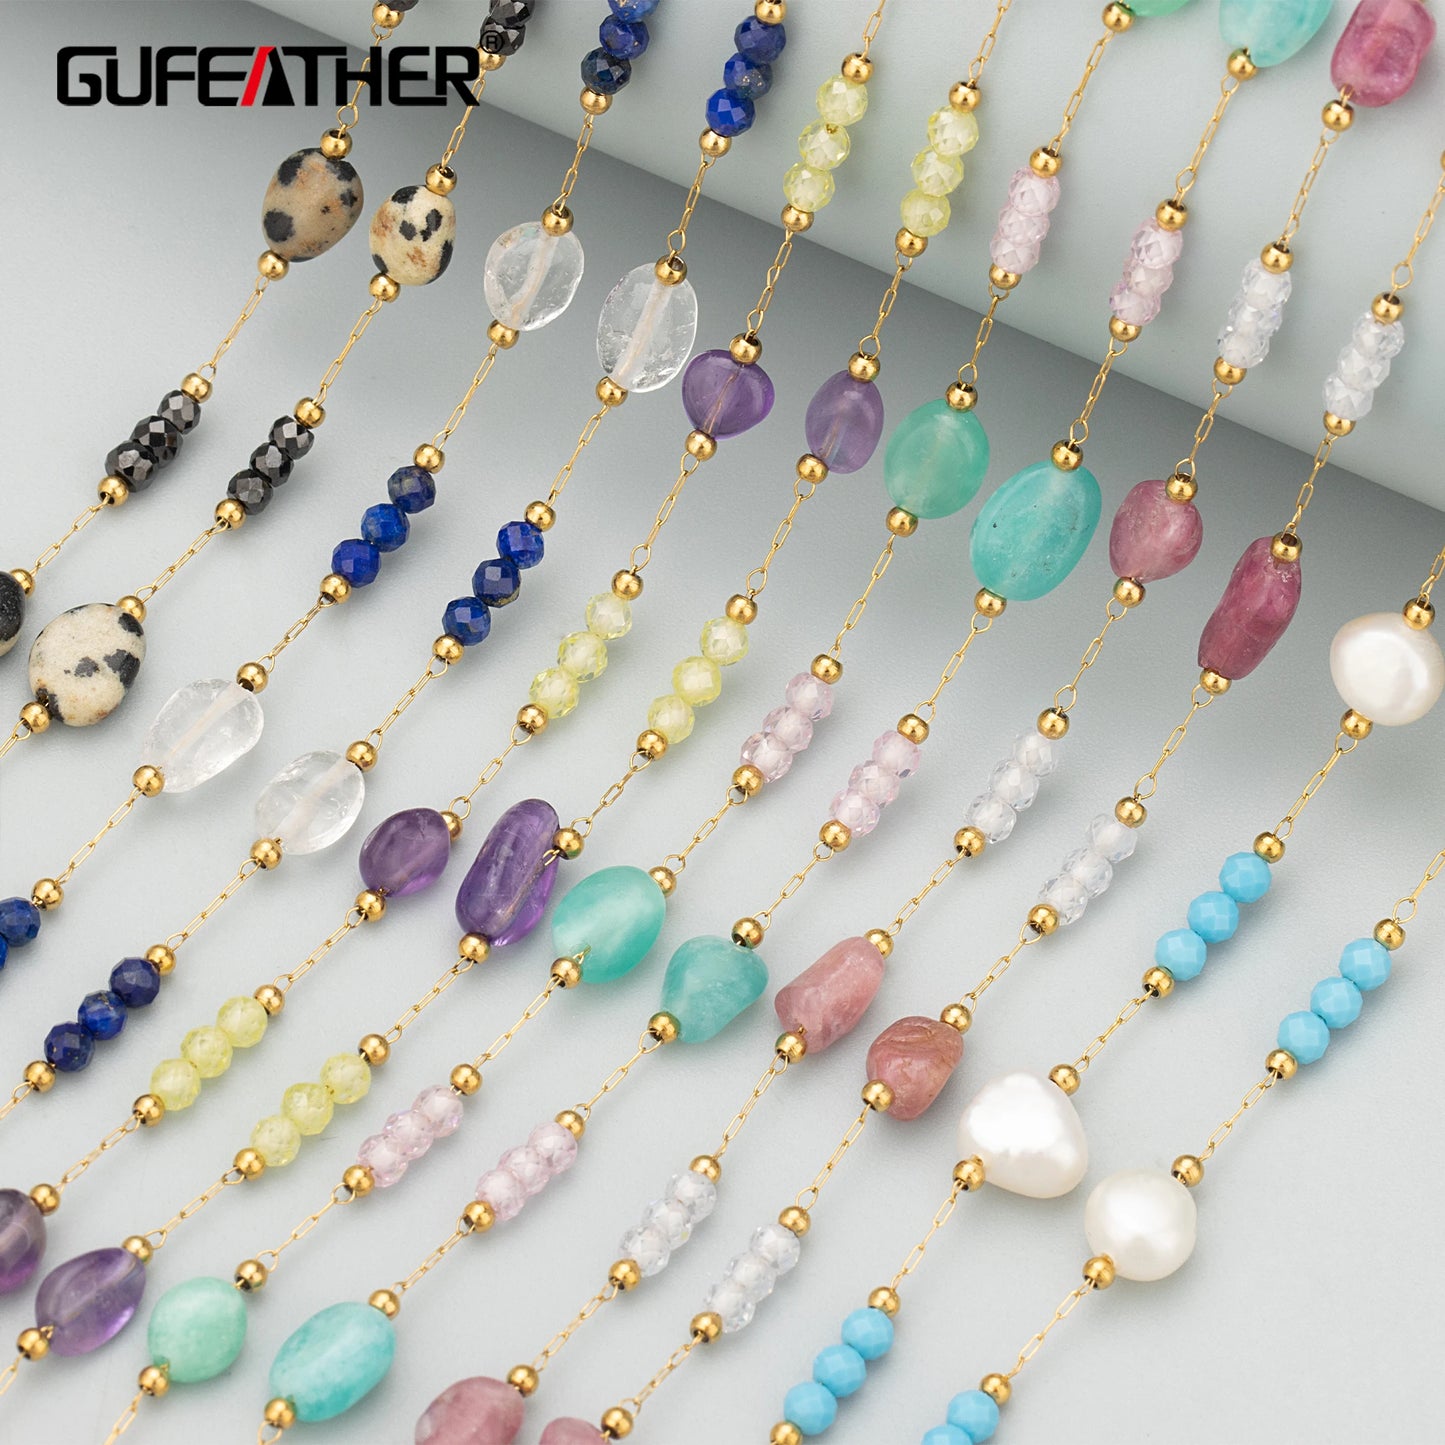 GUFEATHER C382,chain,stainless steel,nickel free,natural stone,hand made,charms,jewelry making,diy bracelet necklace,1m/lot